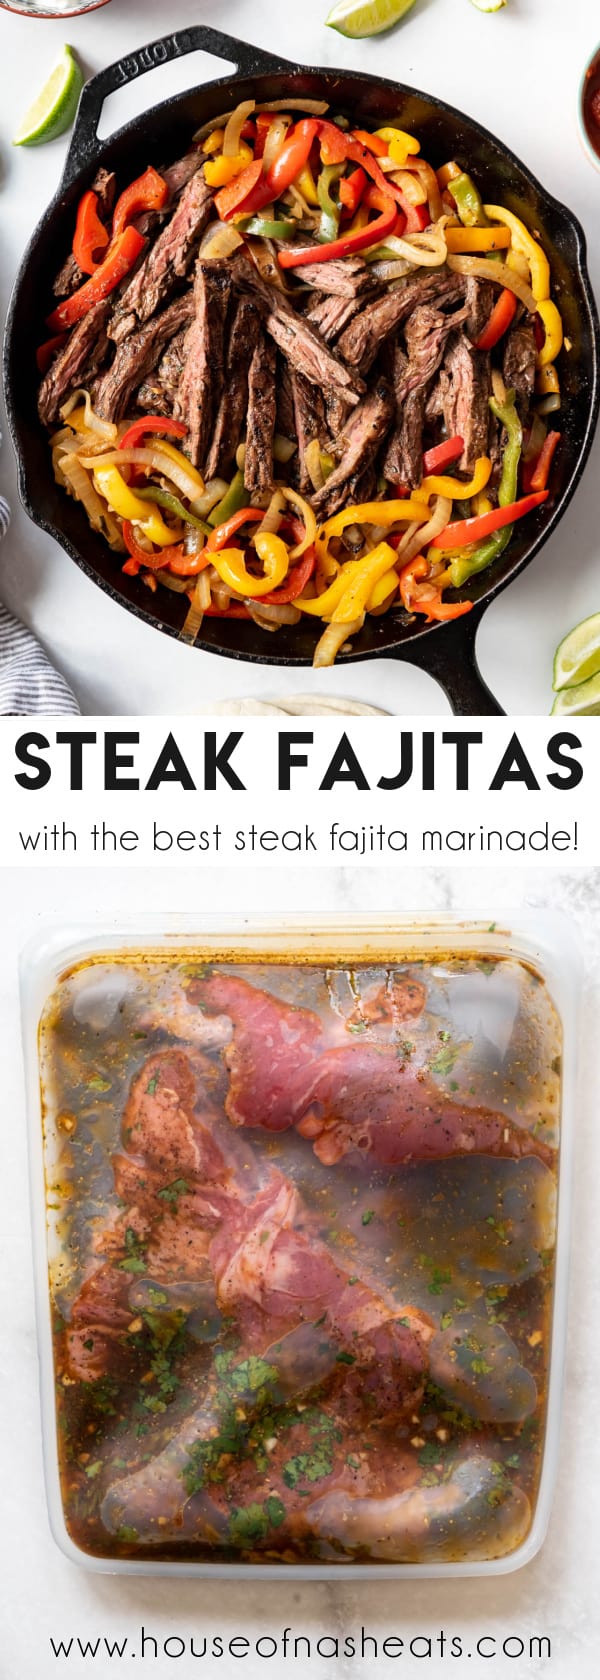 A collage of images of steak fajitas with text overlay.